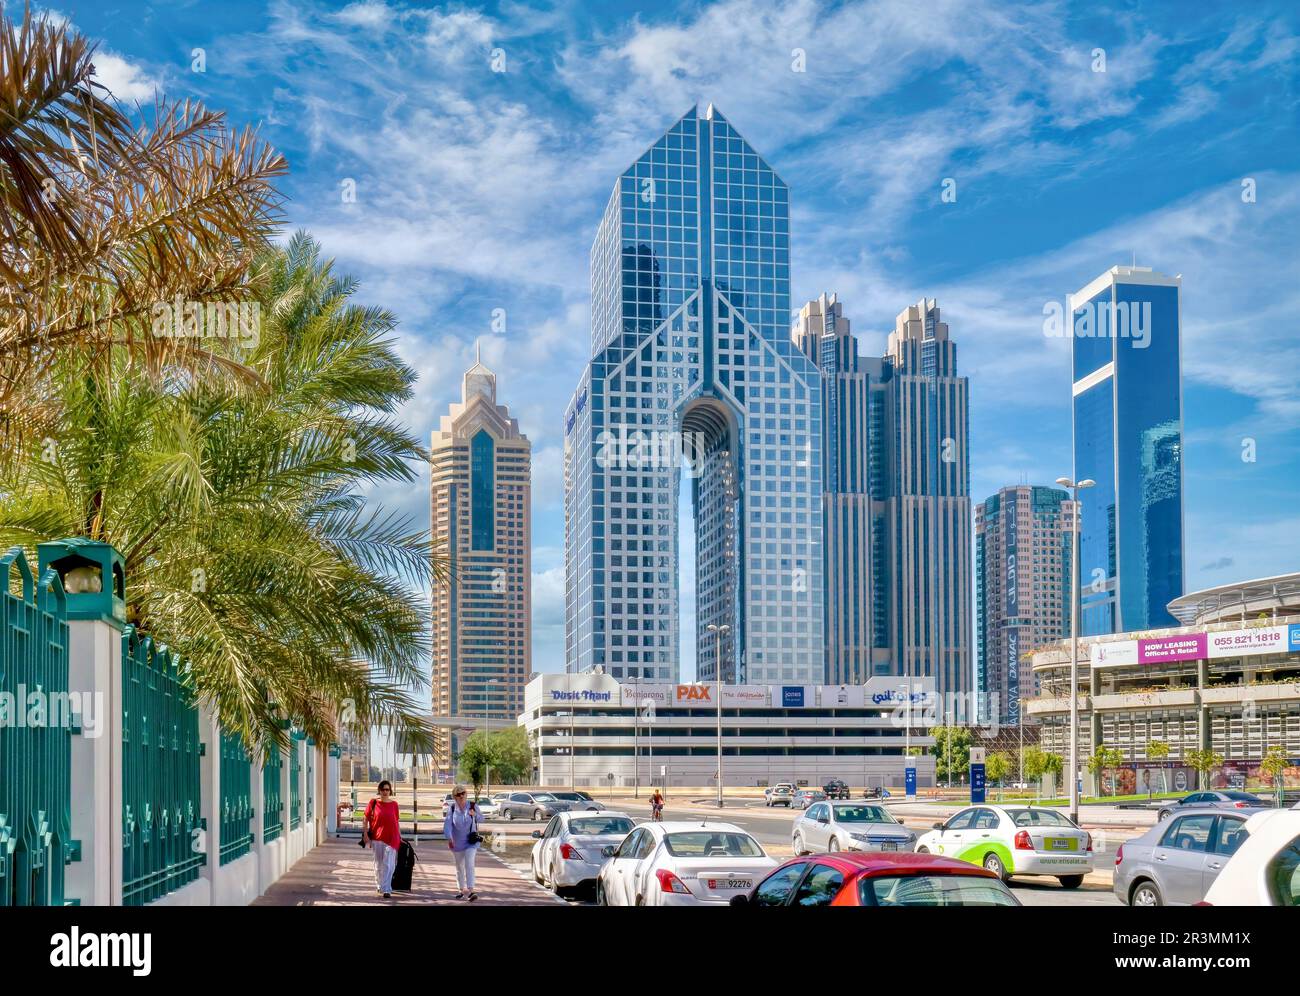 Dubai, UAE - February 20, 2016. Street and parking areas behind the Dusit Thani Hotel and other towers in the city center. Stock Photo